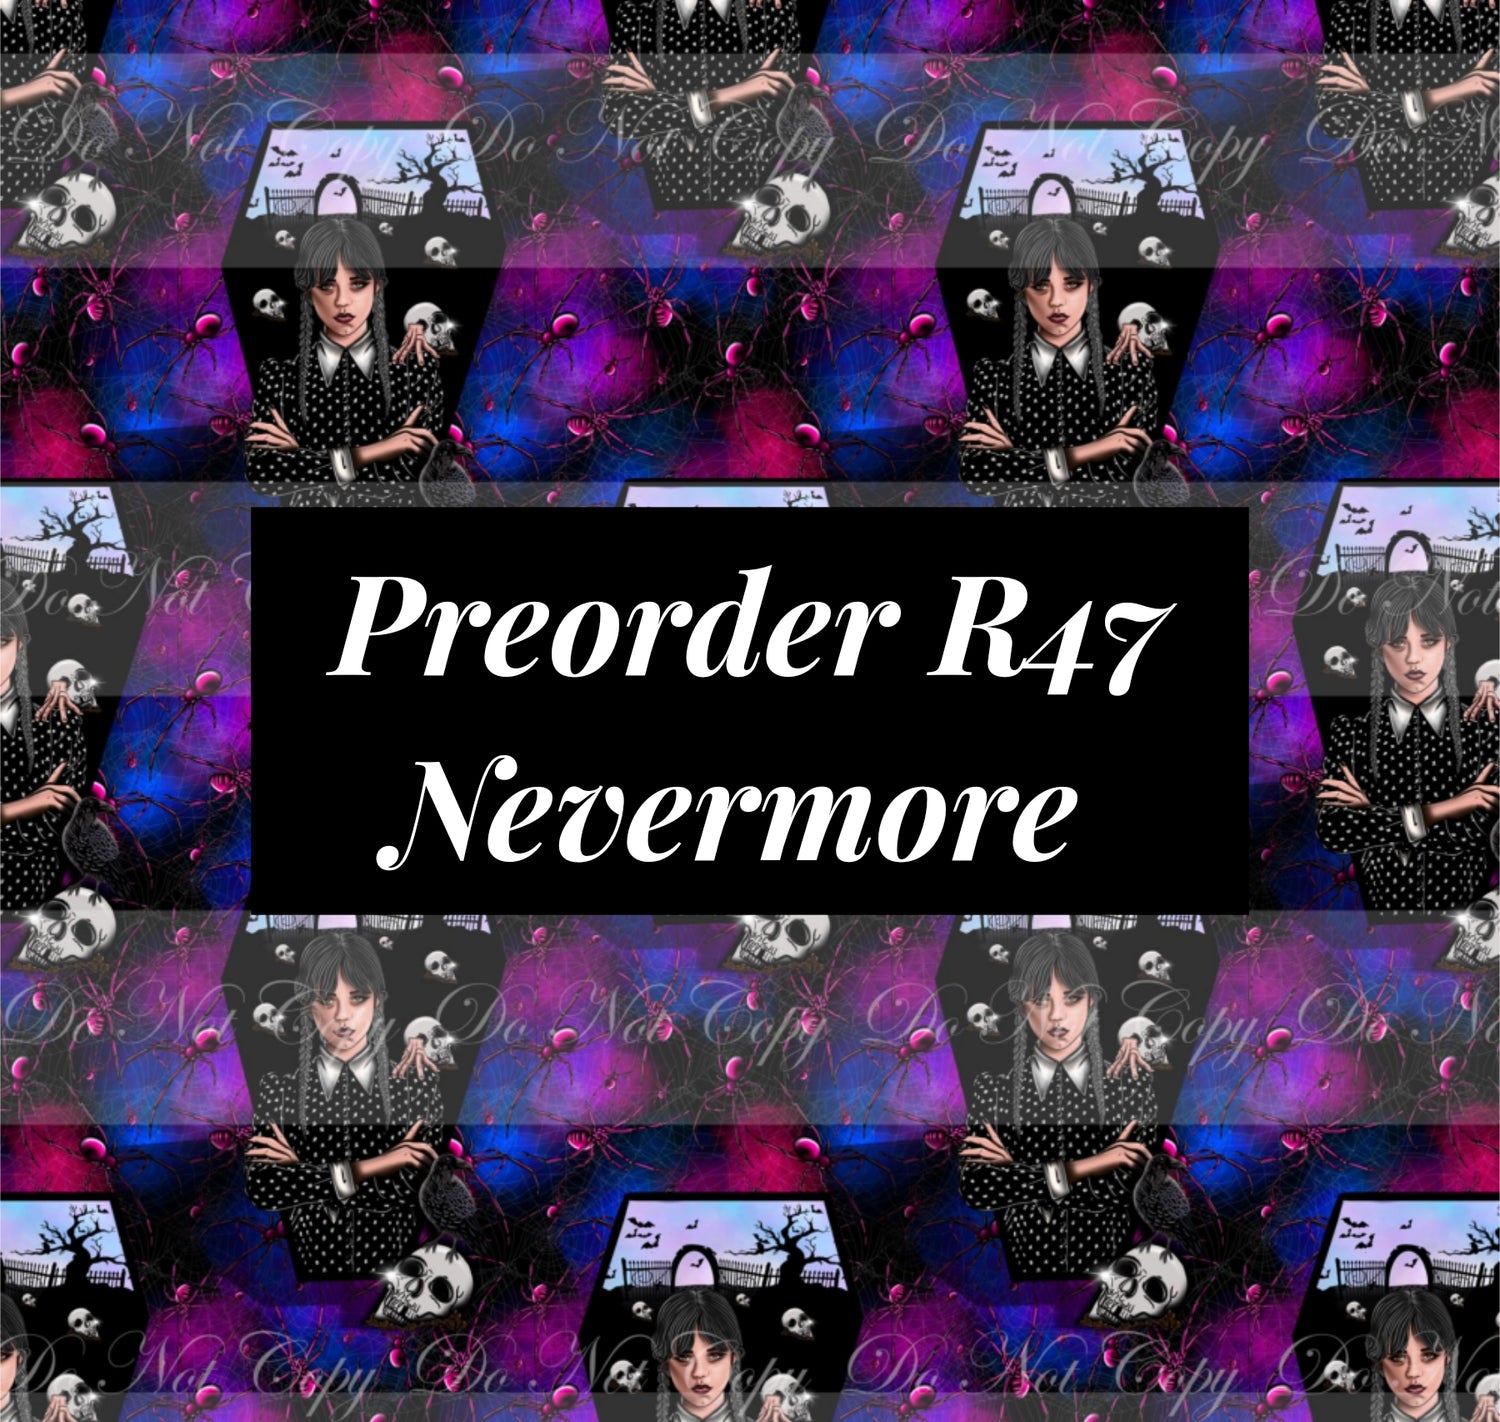 Preorder R47 Nevermore